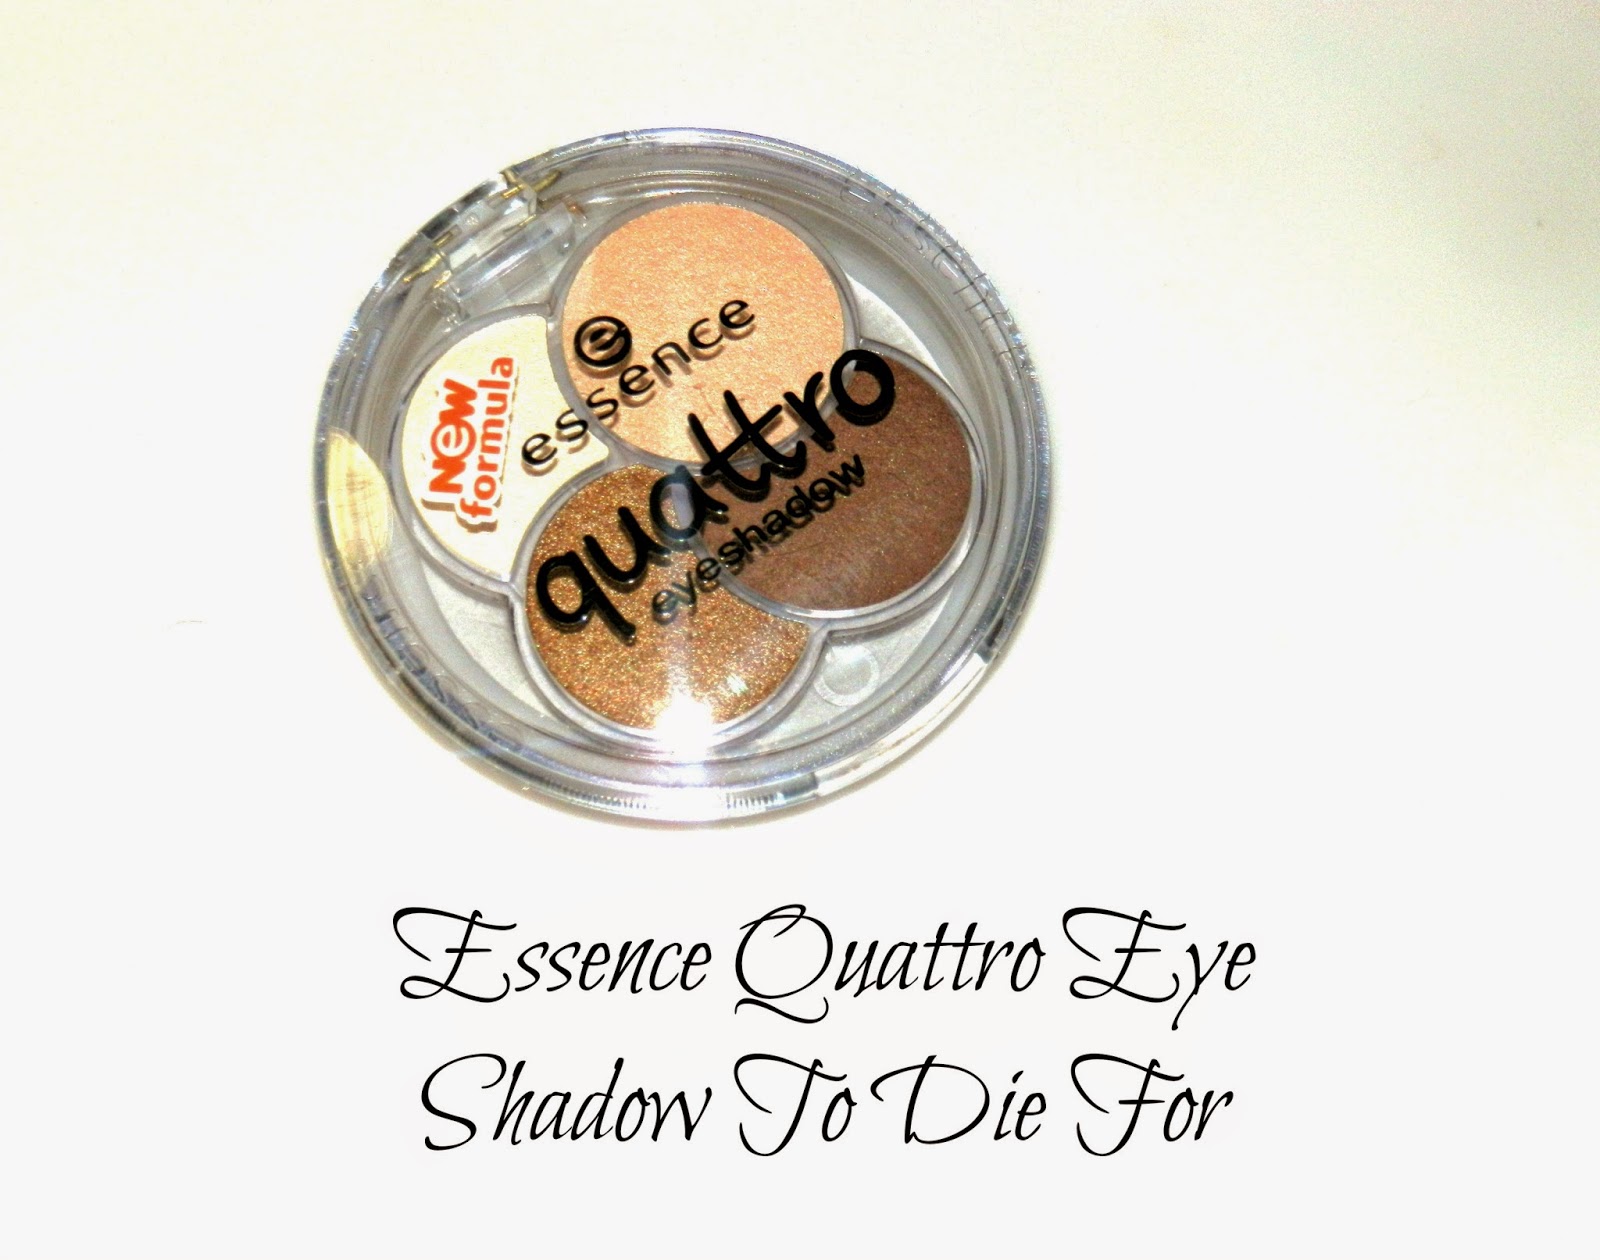 Essence Quatro Eye Shadow 05 To Die For Swatches 